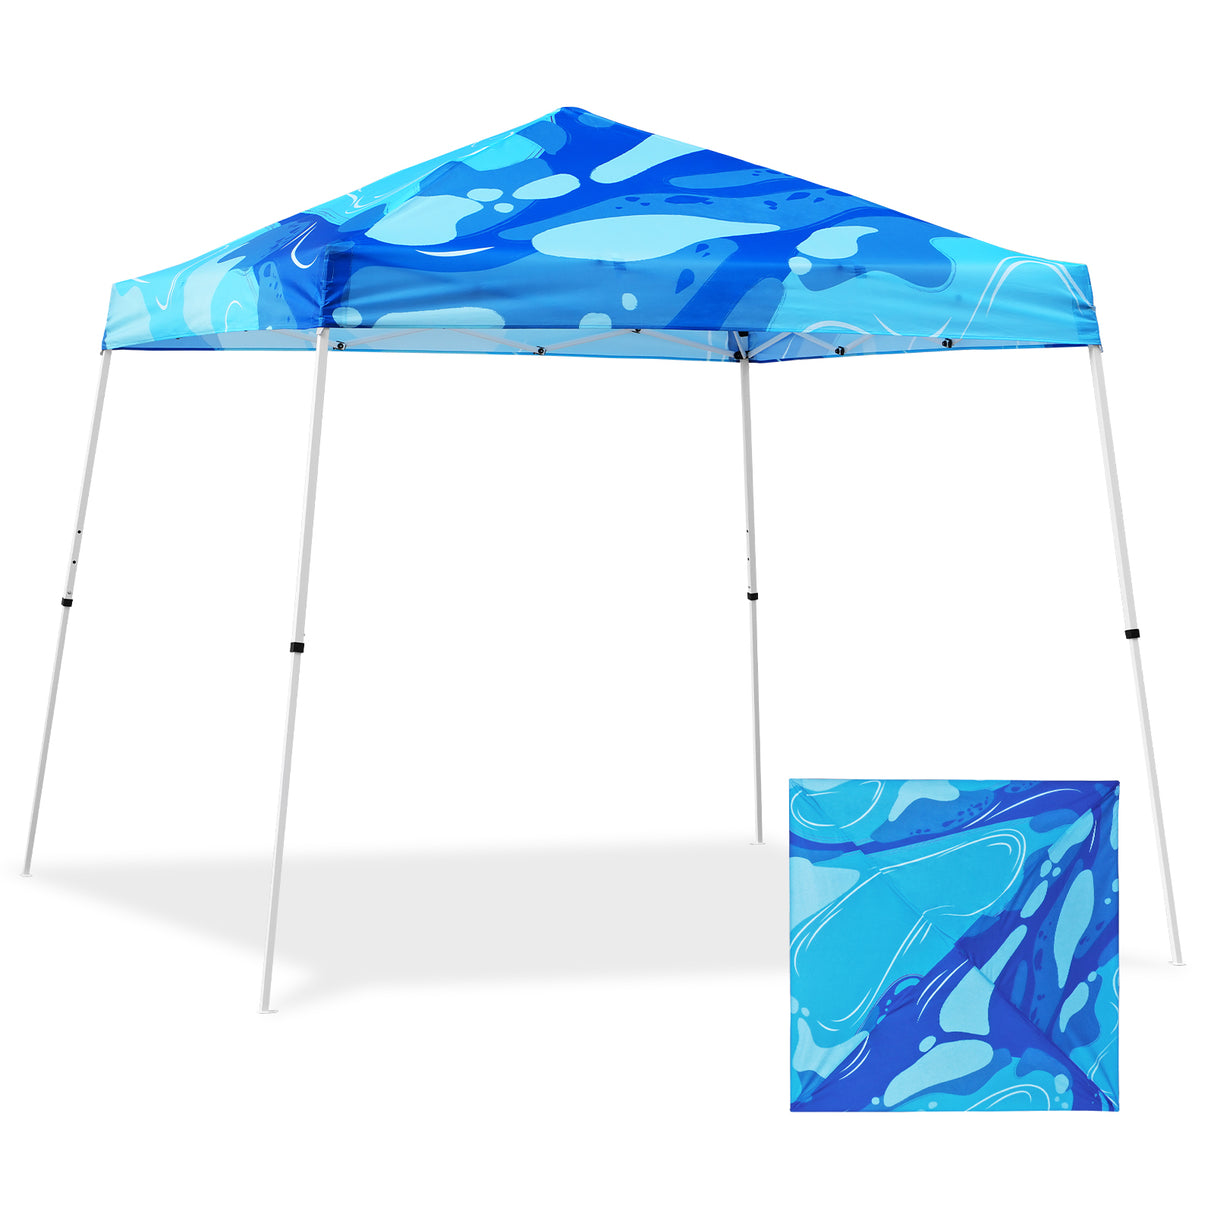 Eagle Peak SHADE GRAPHiX Slant Leg 10x10 Easy Setup Pop Up Canopy Tent with Digital Printed Blue Abstract Top